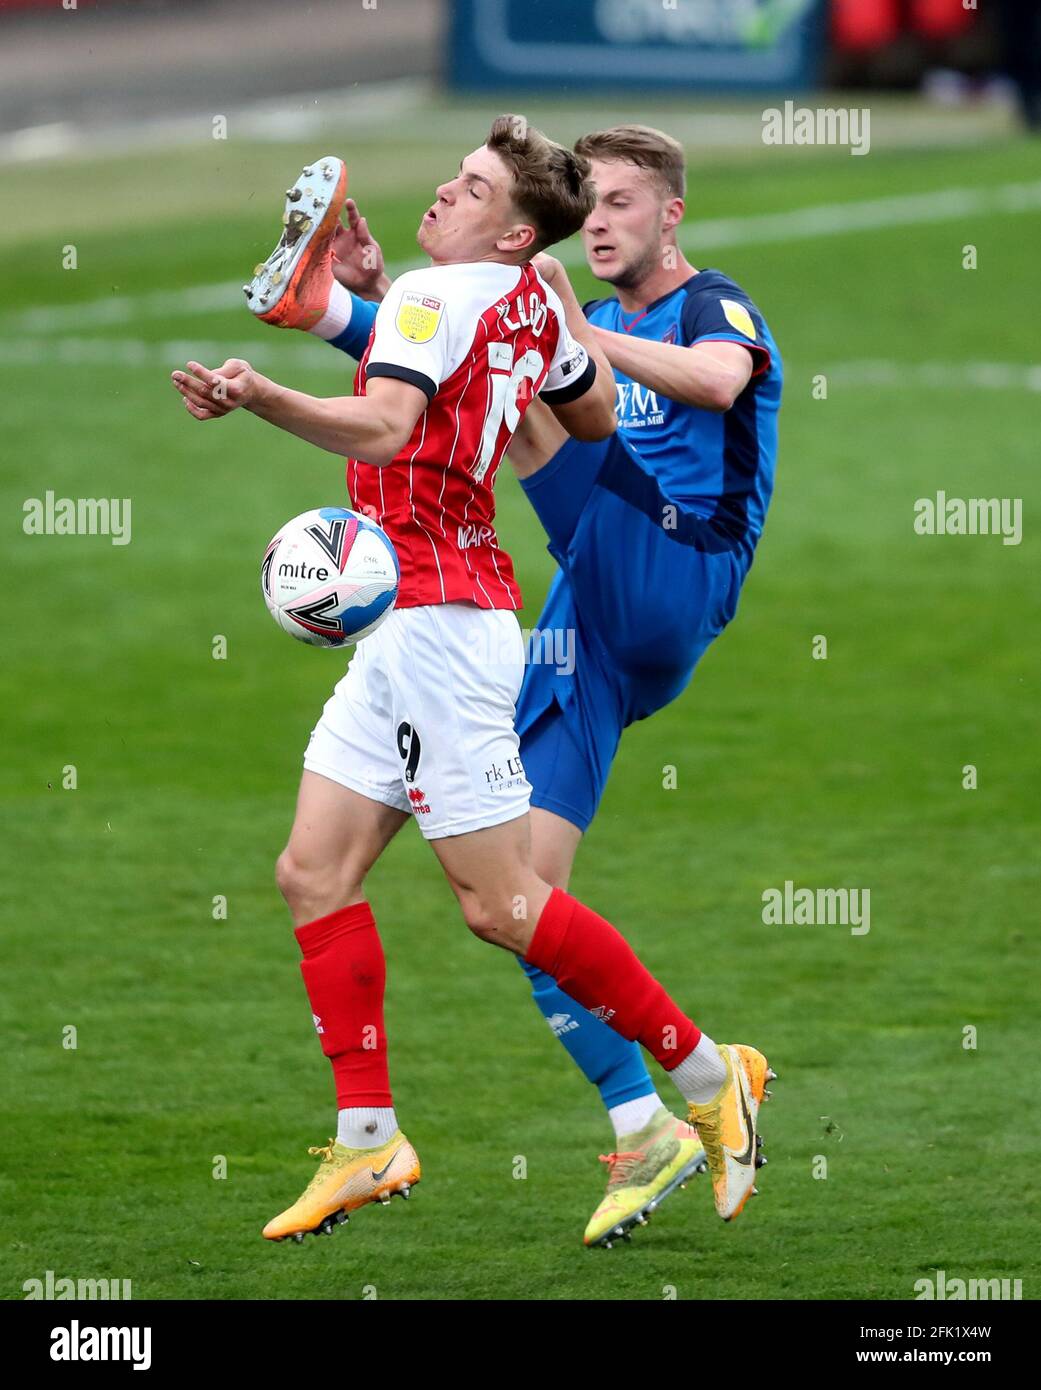 Carlisle United's Jack Armer (right) and Cheltenham Town's George Lloyd battle for the ball during the Sky Bet League Two match at the Jonny-Rocks Stadium, Cheltenham. Picture date: Tuesday April 27, 2021. Stock Photo